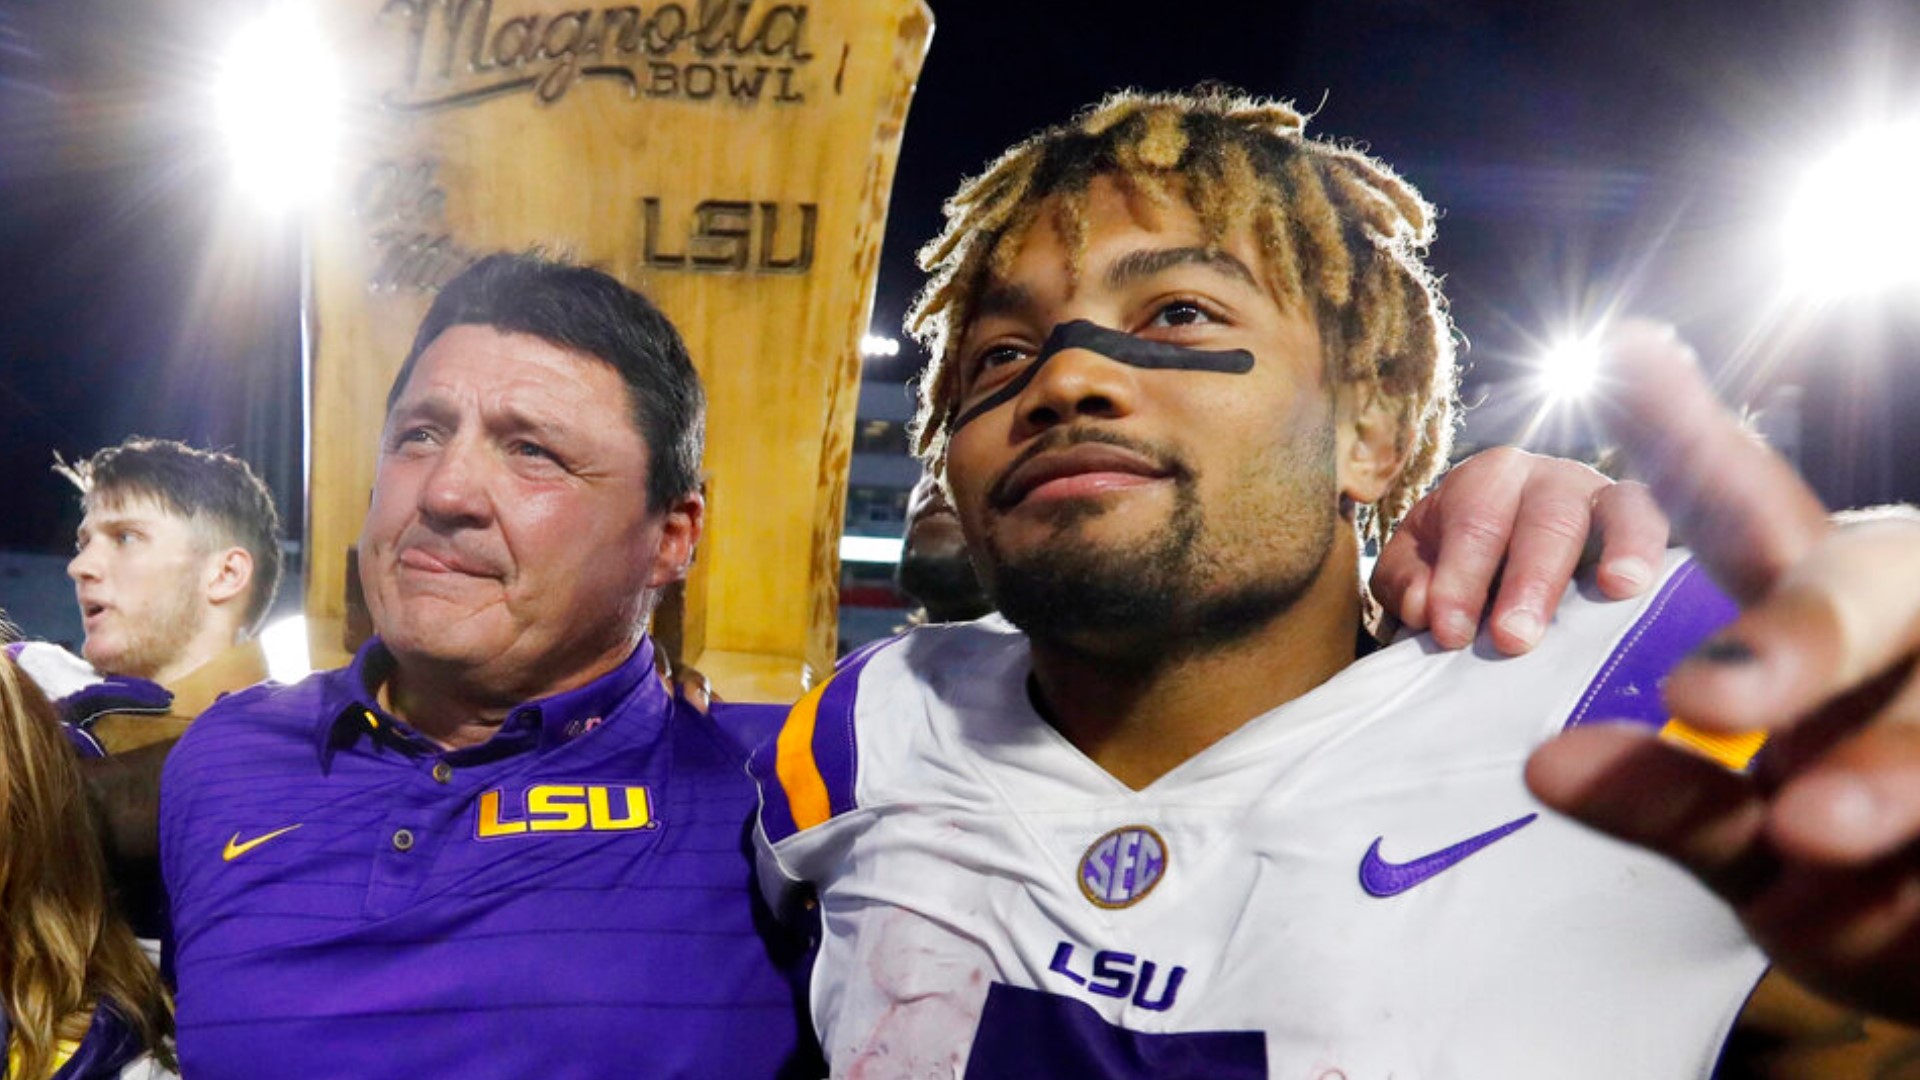 The amended lawsuit also said Ed Orgeron failed to report the rape.